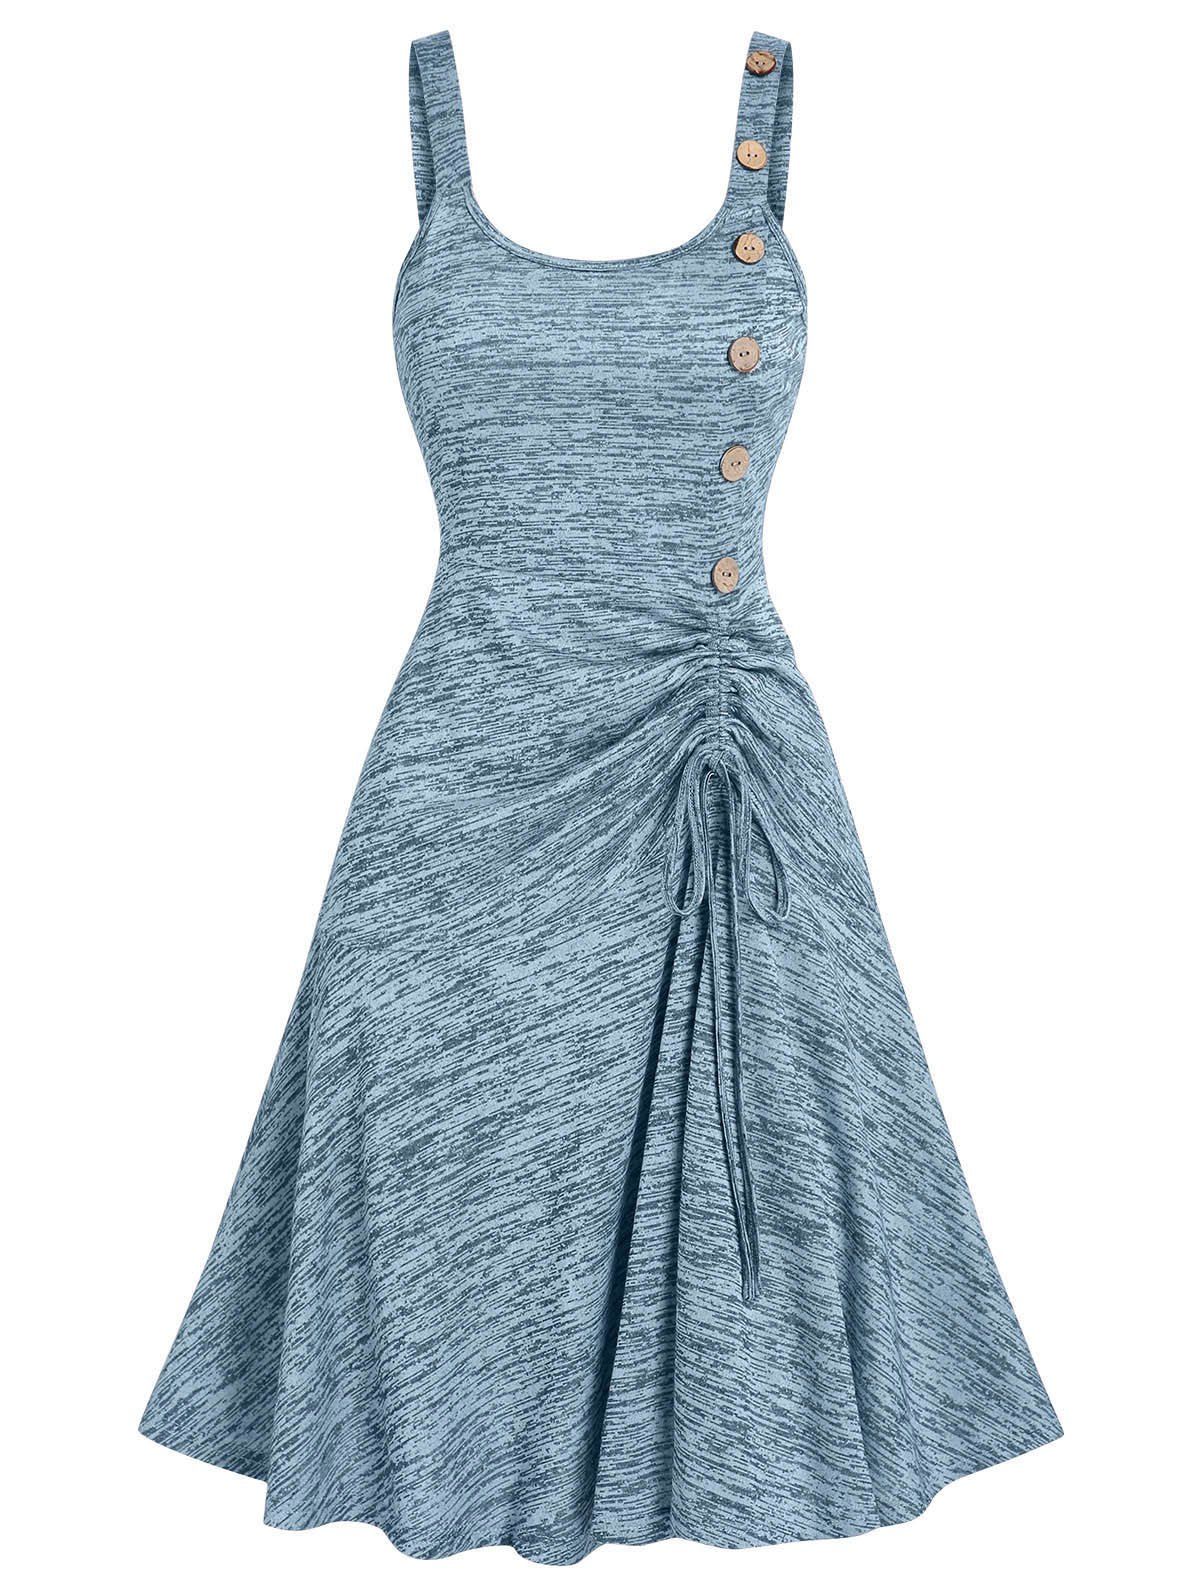 Space Dye Mock Button Cinched Ruched Tie Up Flare A Line Dress - LIGHT BLUE L